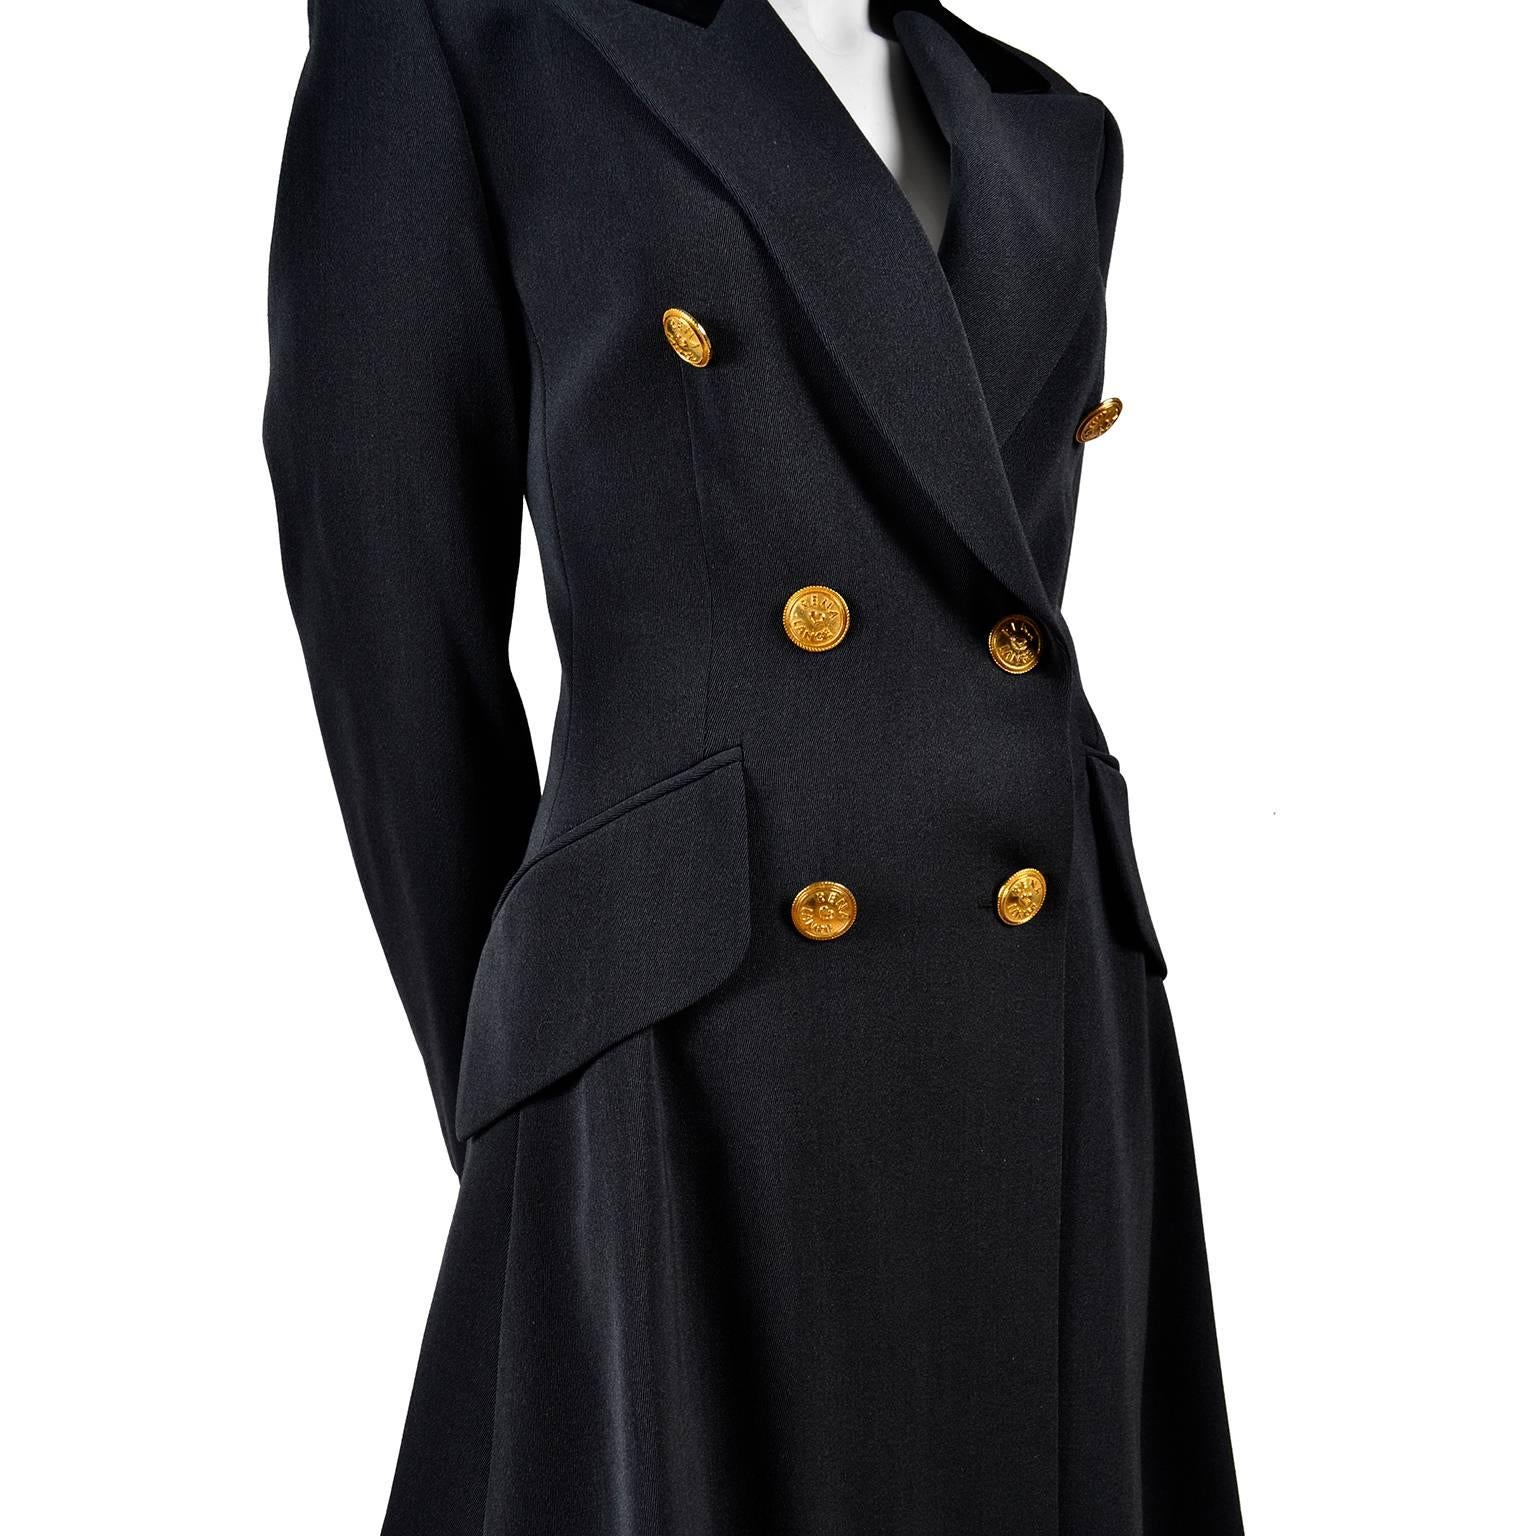 This vintage gray suit was designed by Rena Lange in the 1980's and is made in a wool/silk blend. The long, double breasted jacket has front flap pockets, a notched lapel and a black cotton velvet collar.  The gold buttons are marked Rena Lange and